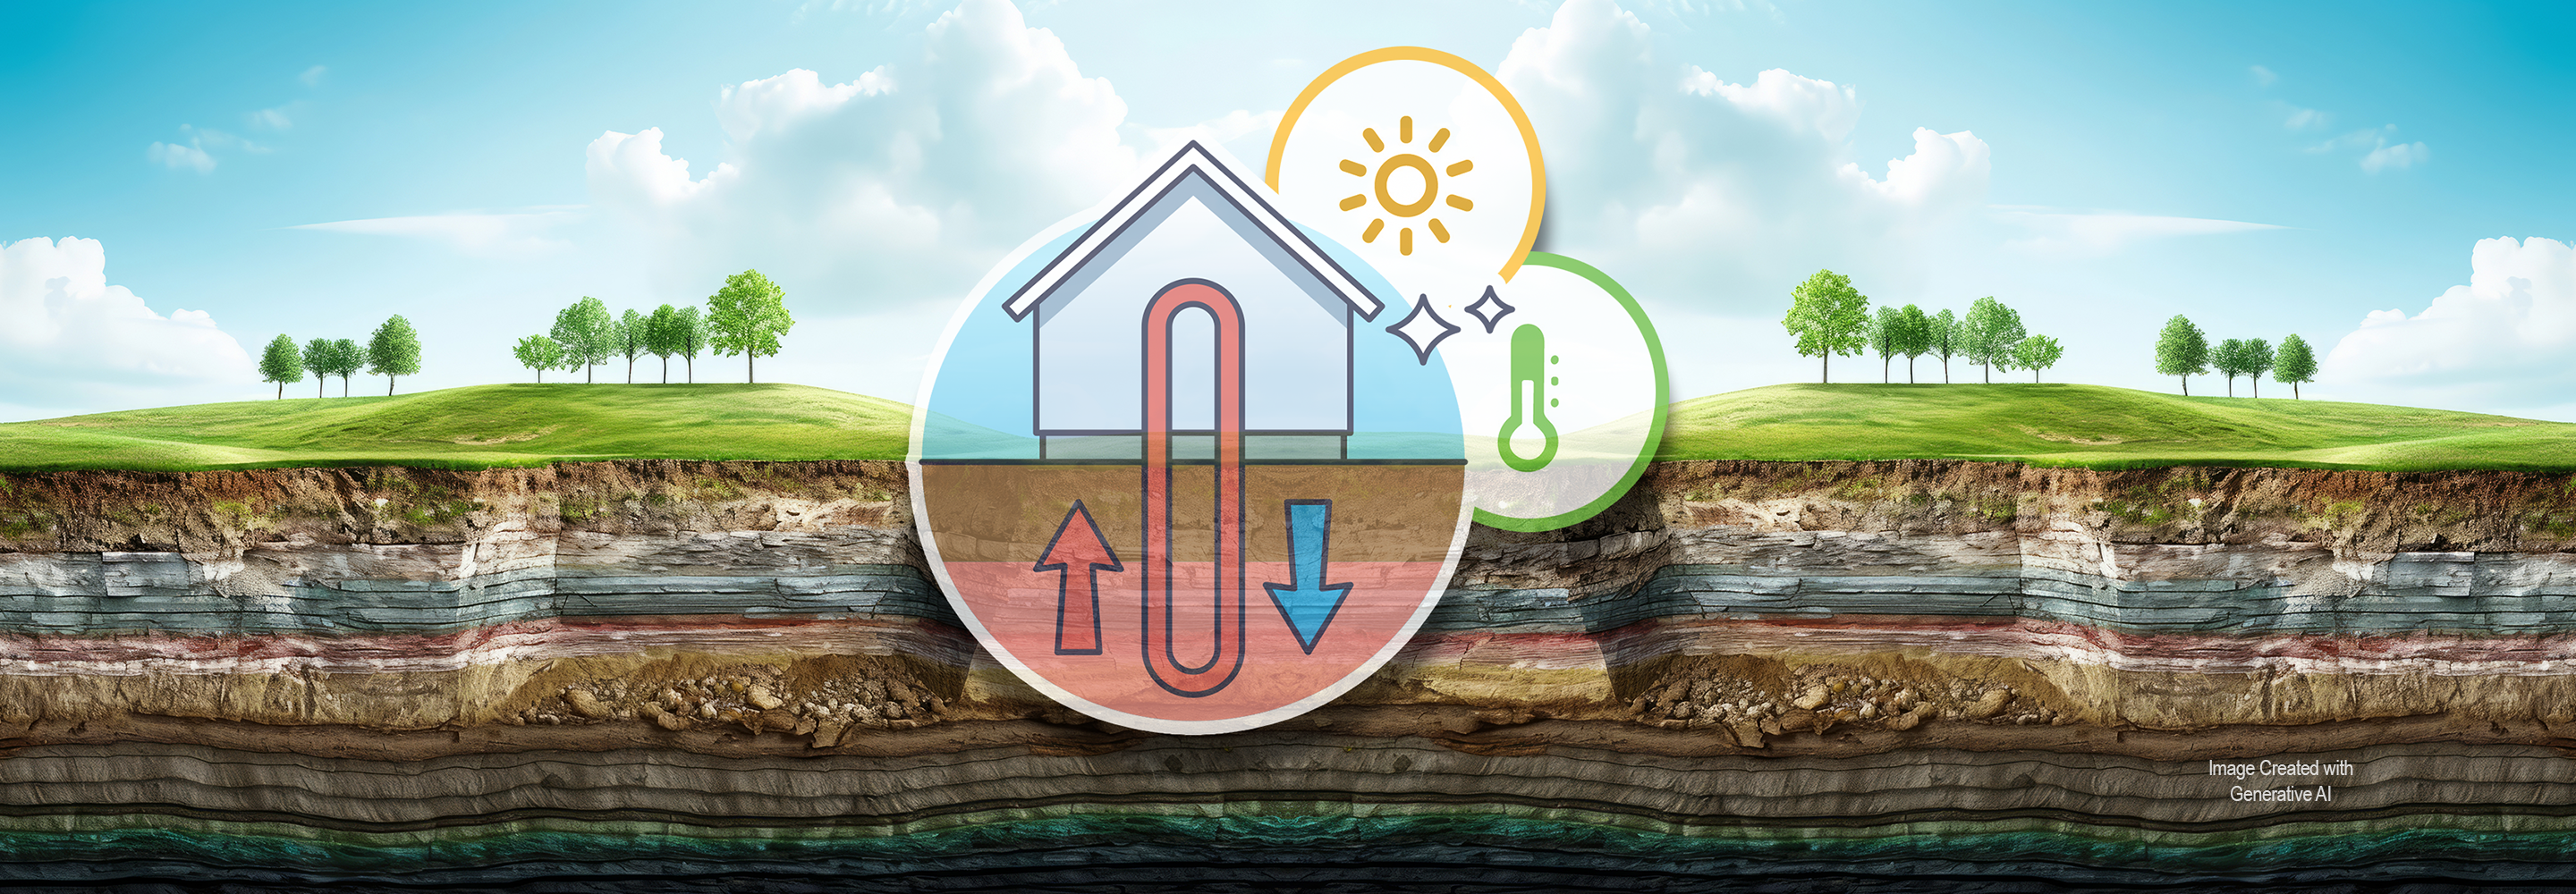 Blue sky, clouds. Cross-section of the layers of soil. An icon with a house, red arrow representing heat circulation from the ground. An icon of the sun. An icon of temperature.